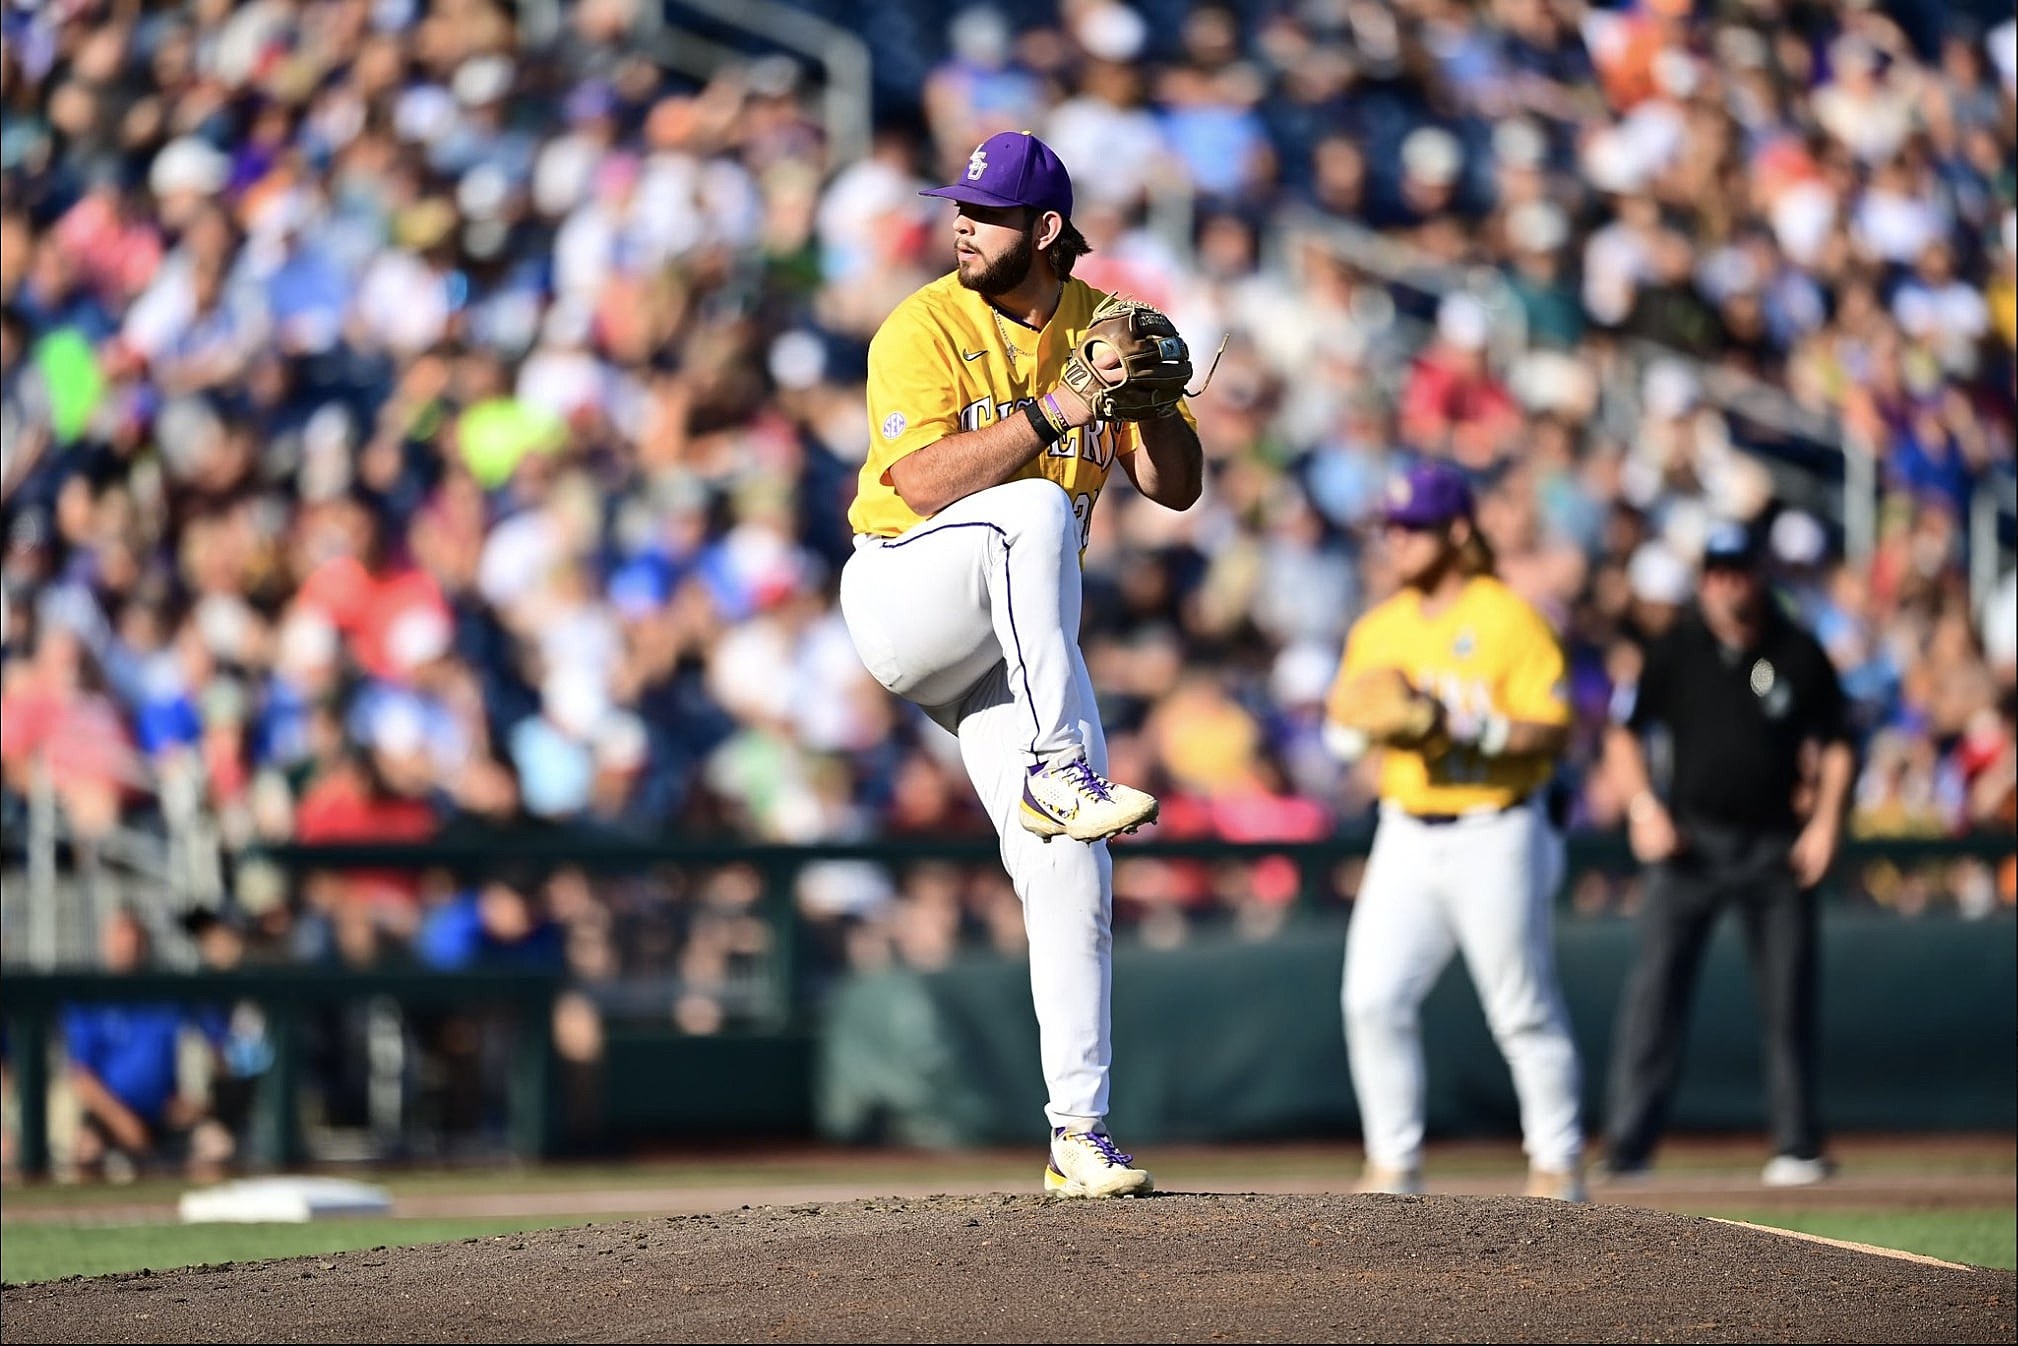 Nate Ackenhausen shines in his first start and LSU shuts out